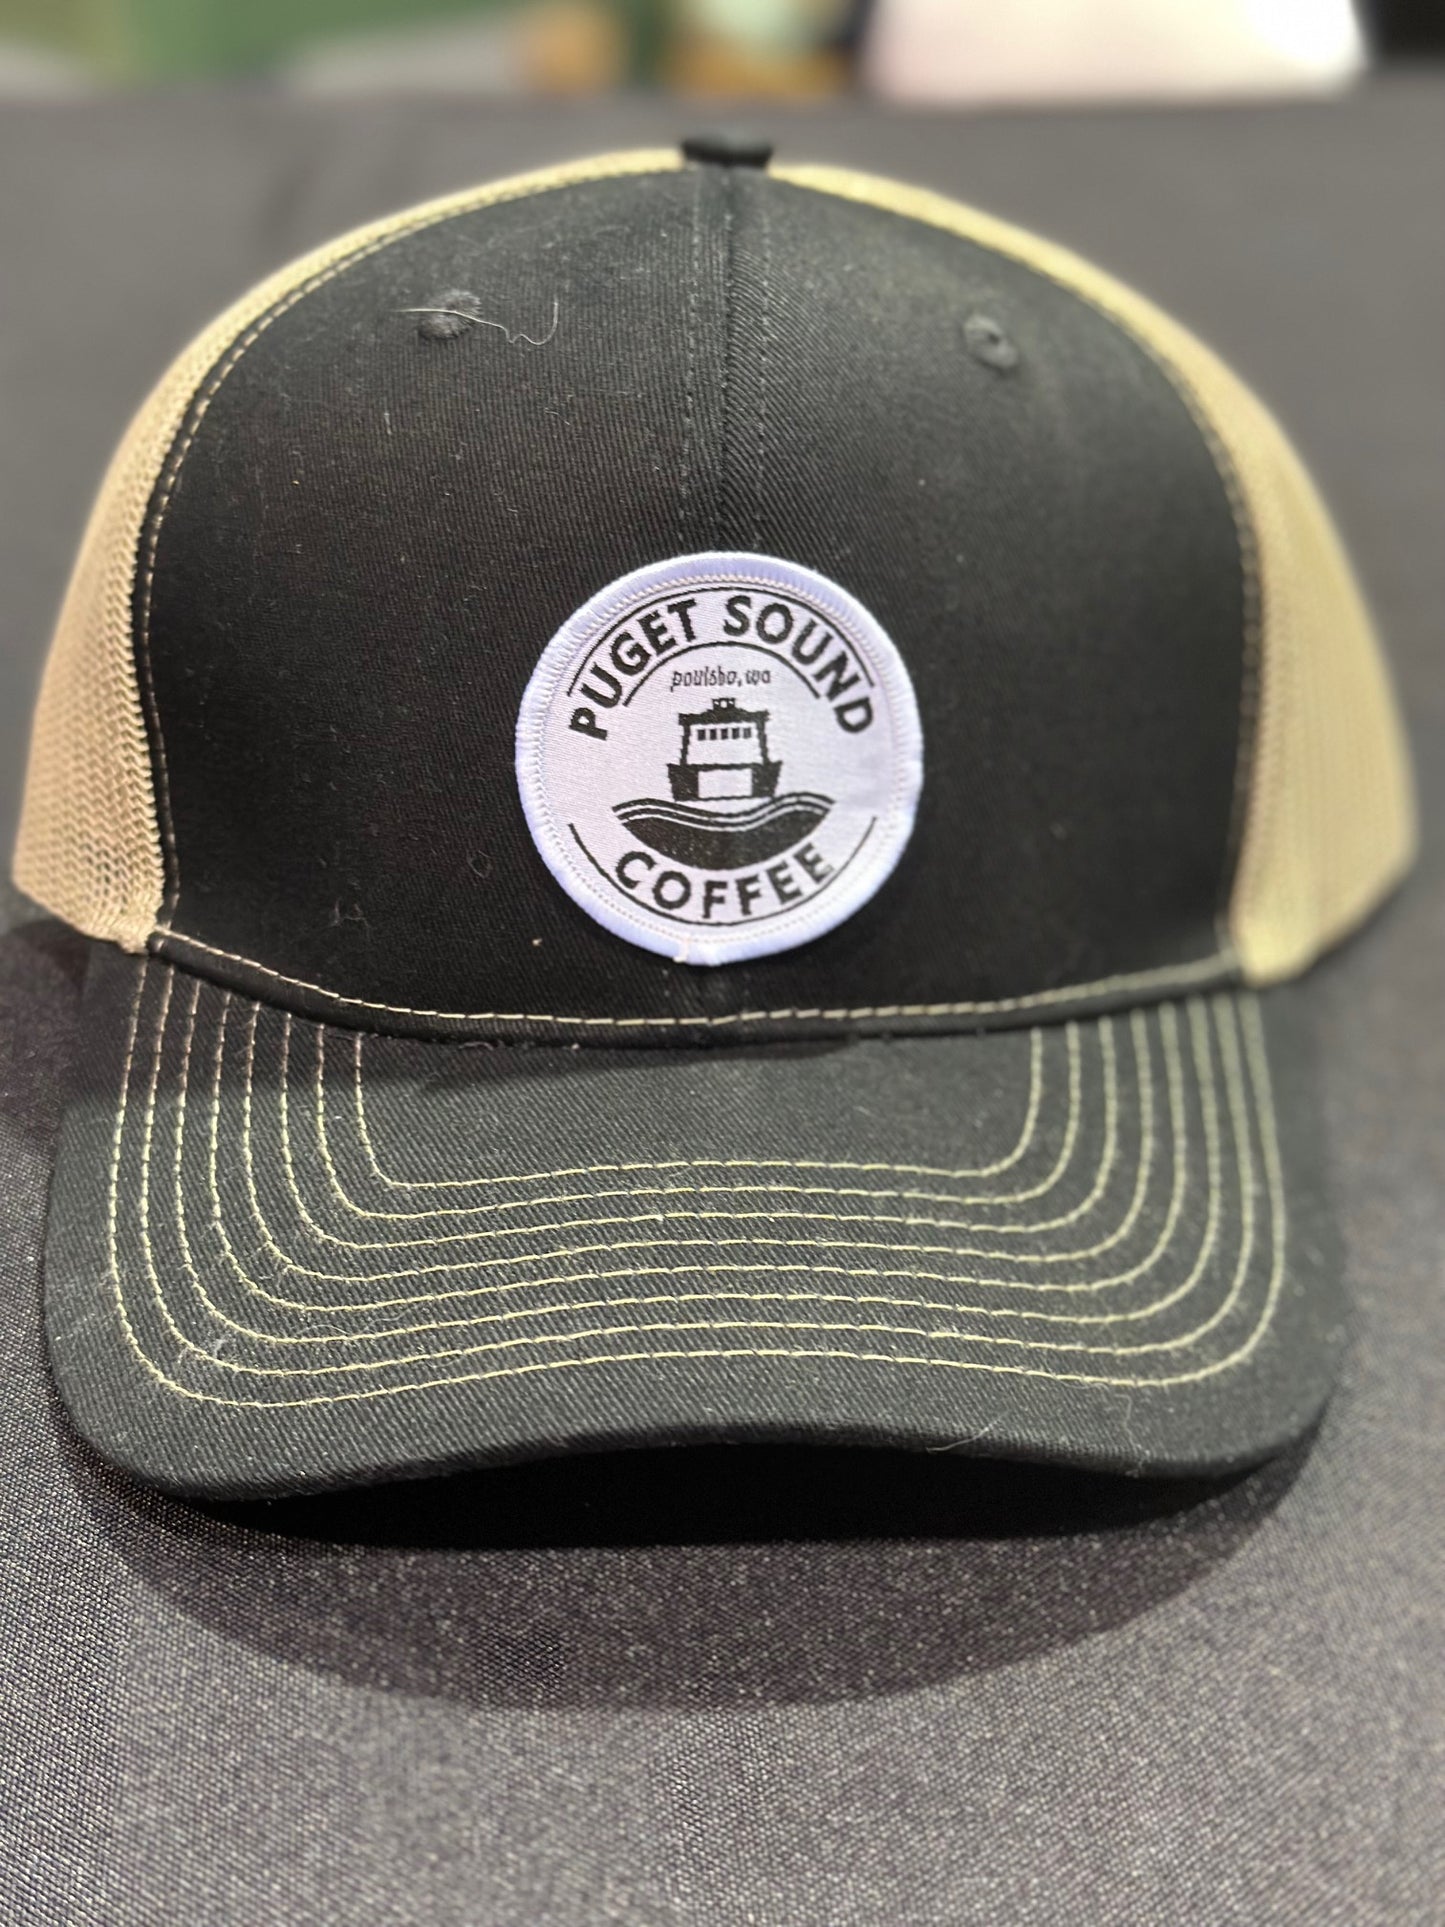 Puget Sound Coffee Patch on a Trucker Hat